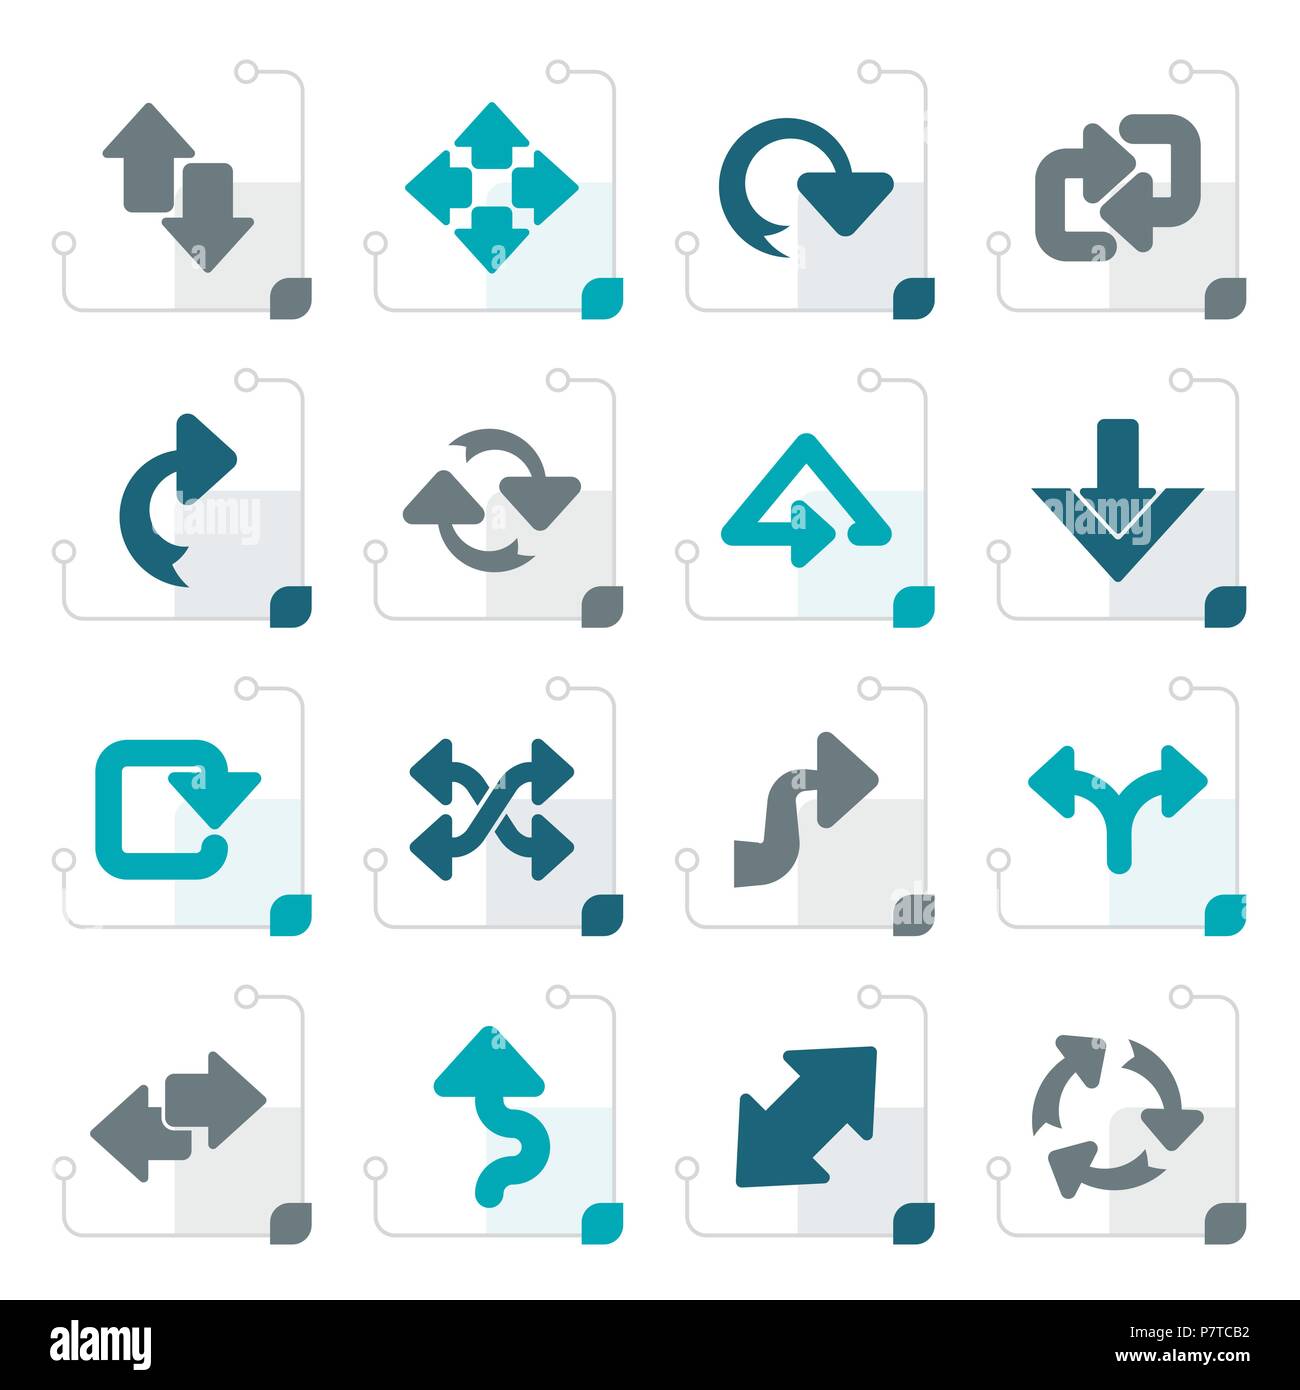 Stylized different kind of arrows icons - vector icon set Stock Vector